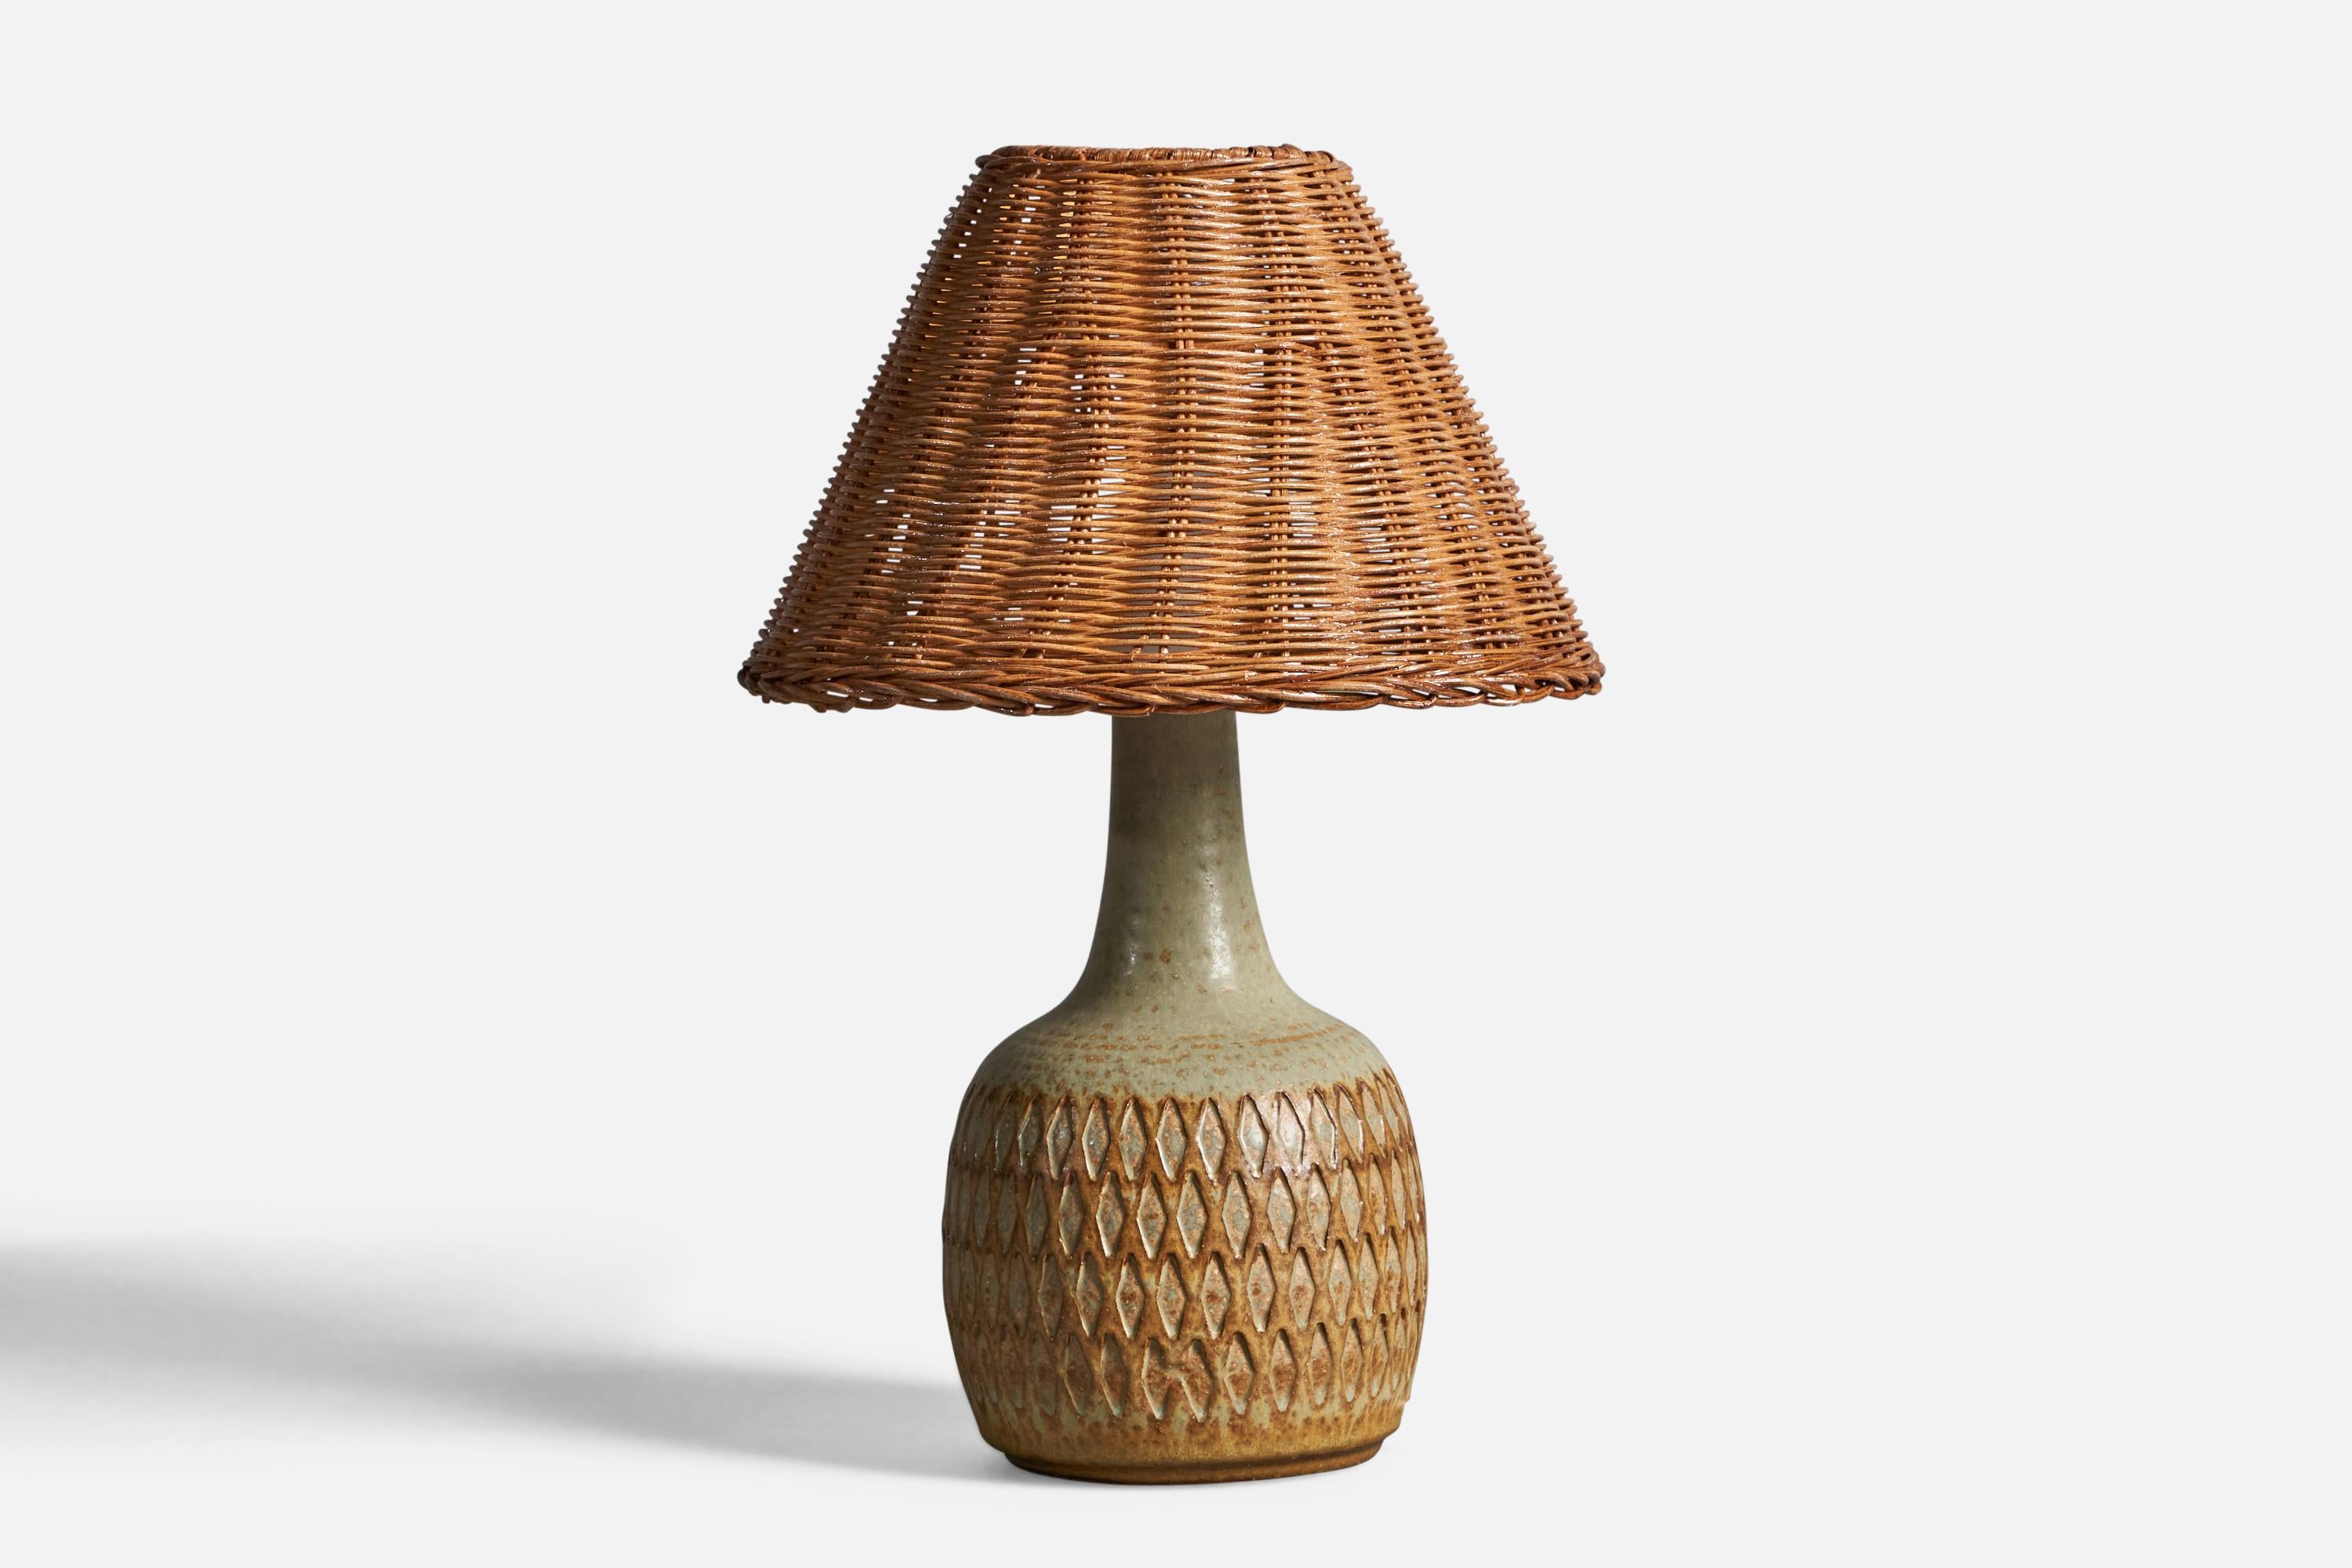 A green and brown-glazed incised stoneware and rattan table lamp, designed and produced in Denmark, 1960s.

Overall Dimensions (inches): 13